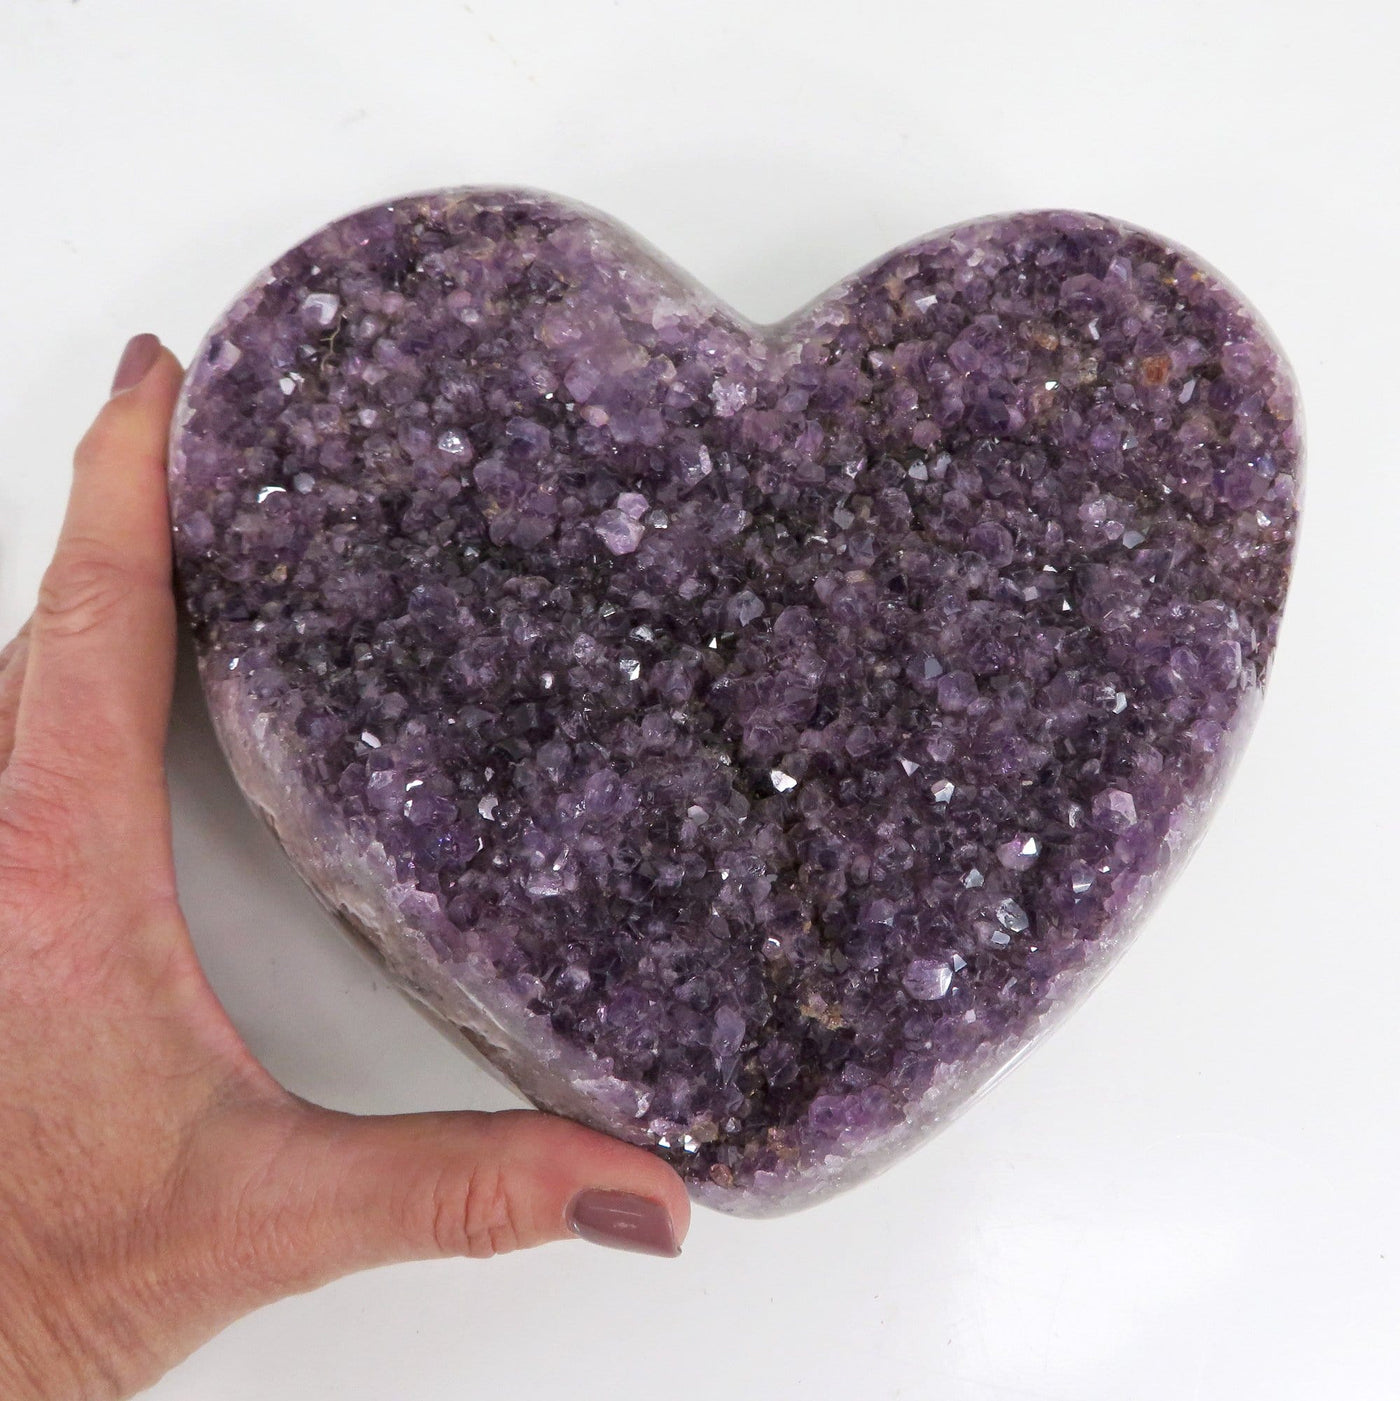 Large amethyst heart cluster with a woman's hand next to it on a white background.